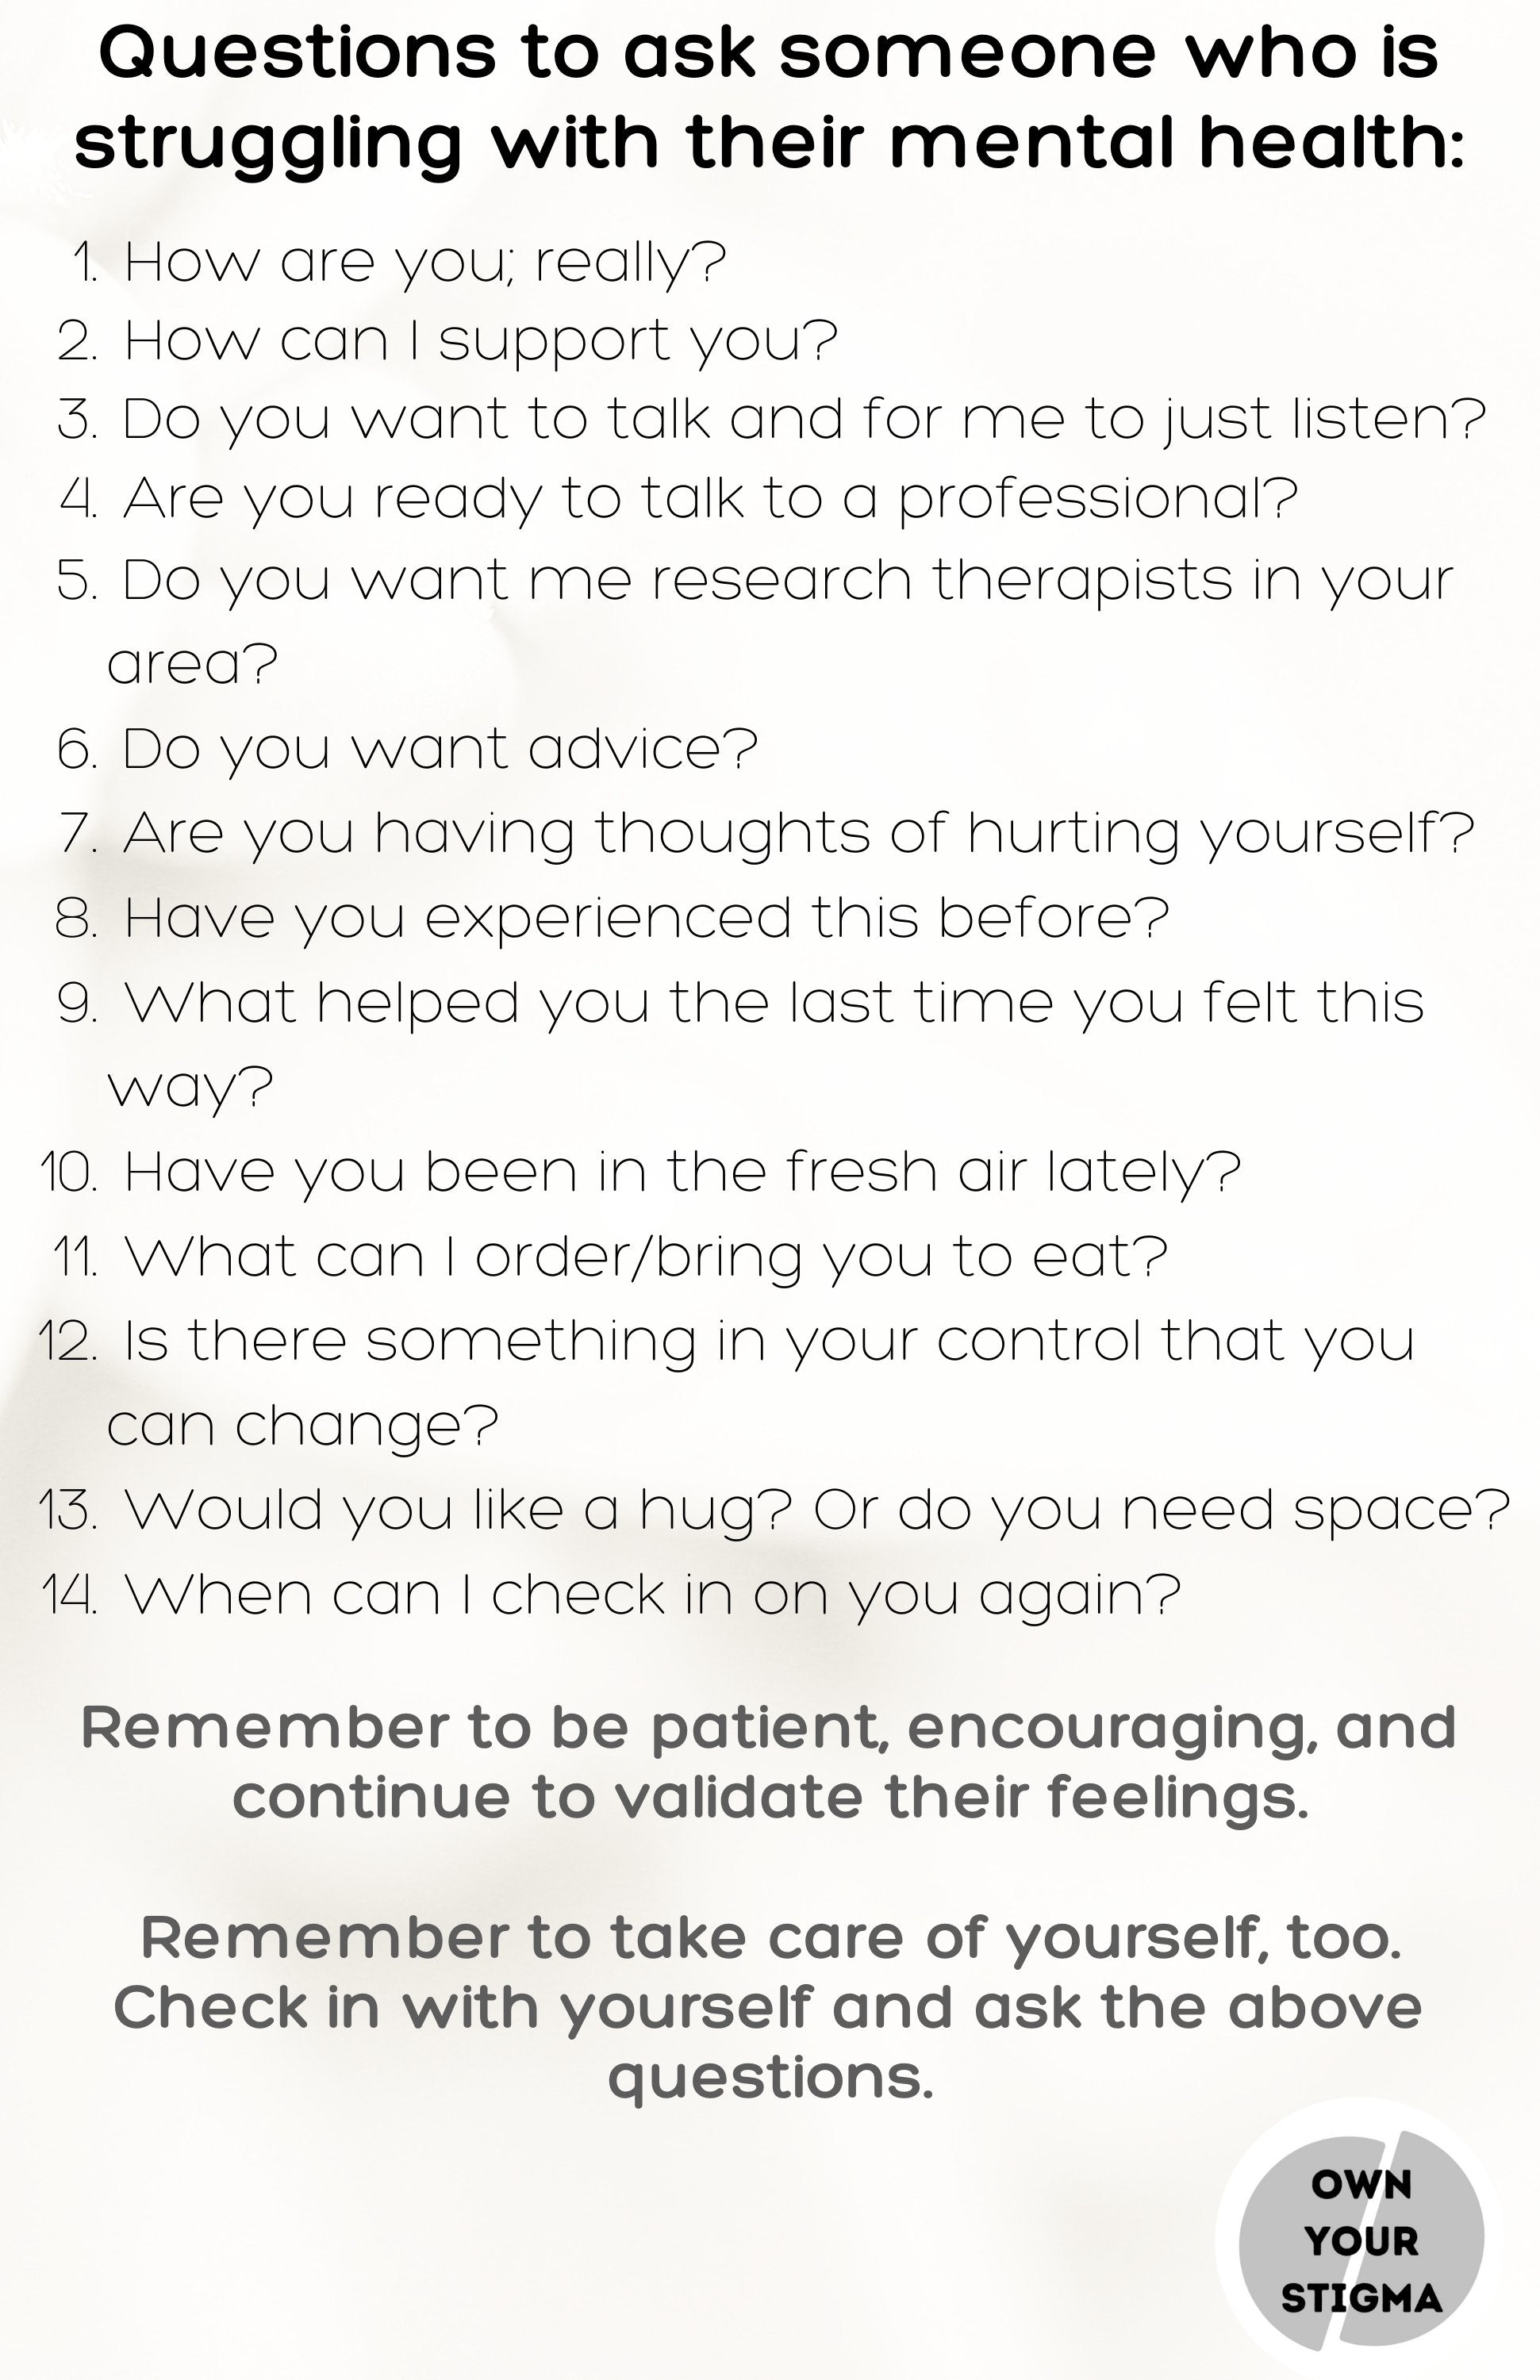 Questions To Ask Someone Who Is Depressed – Own Your Stigma